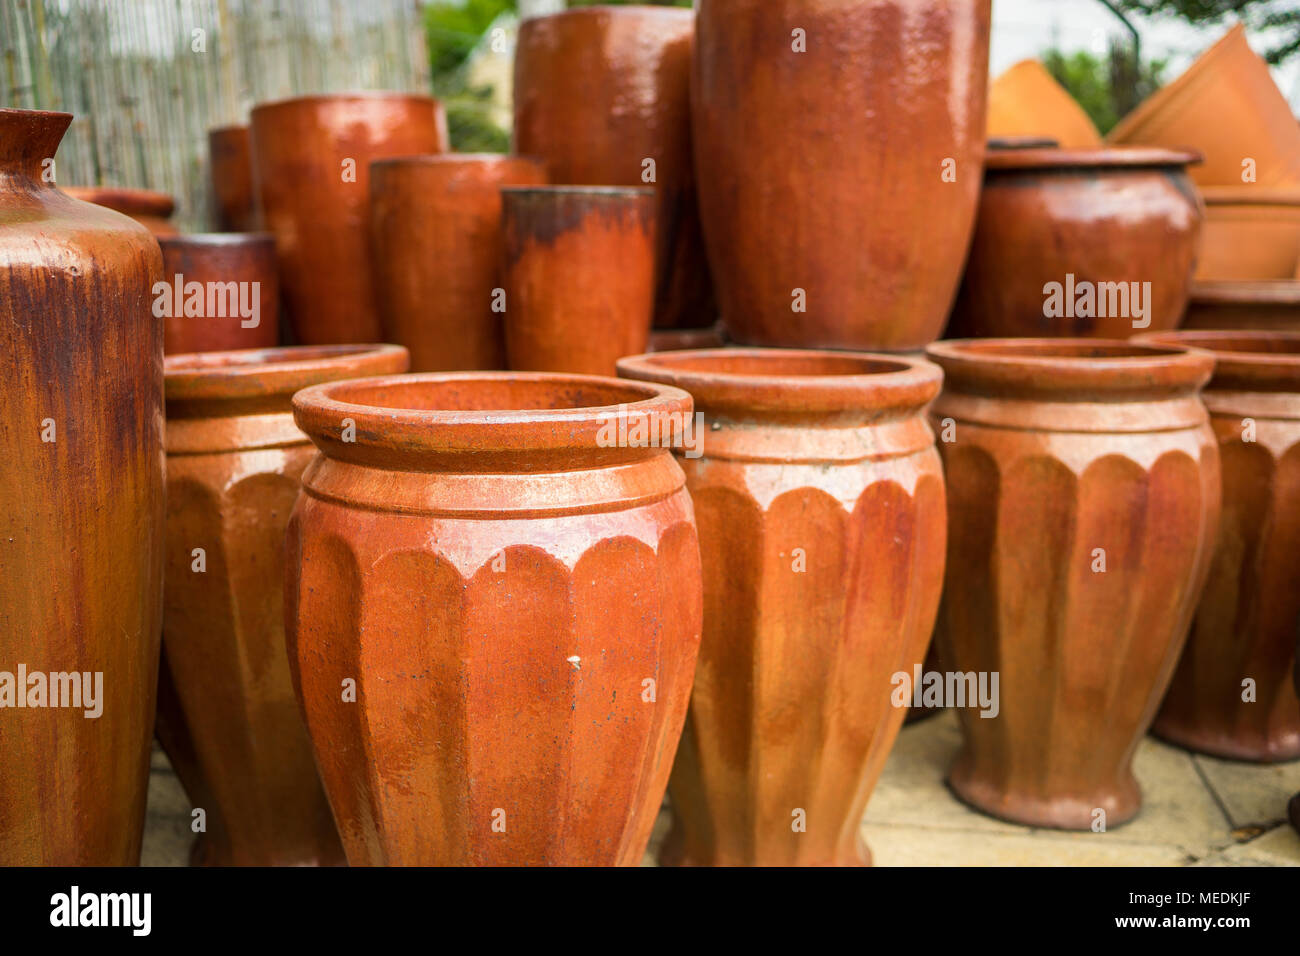 Large Ceramic Flower Pots High Resolution Stock Photography And Images Alamy